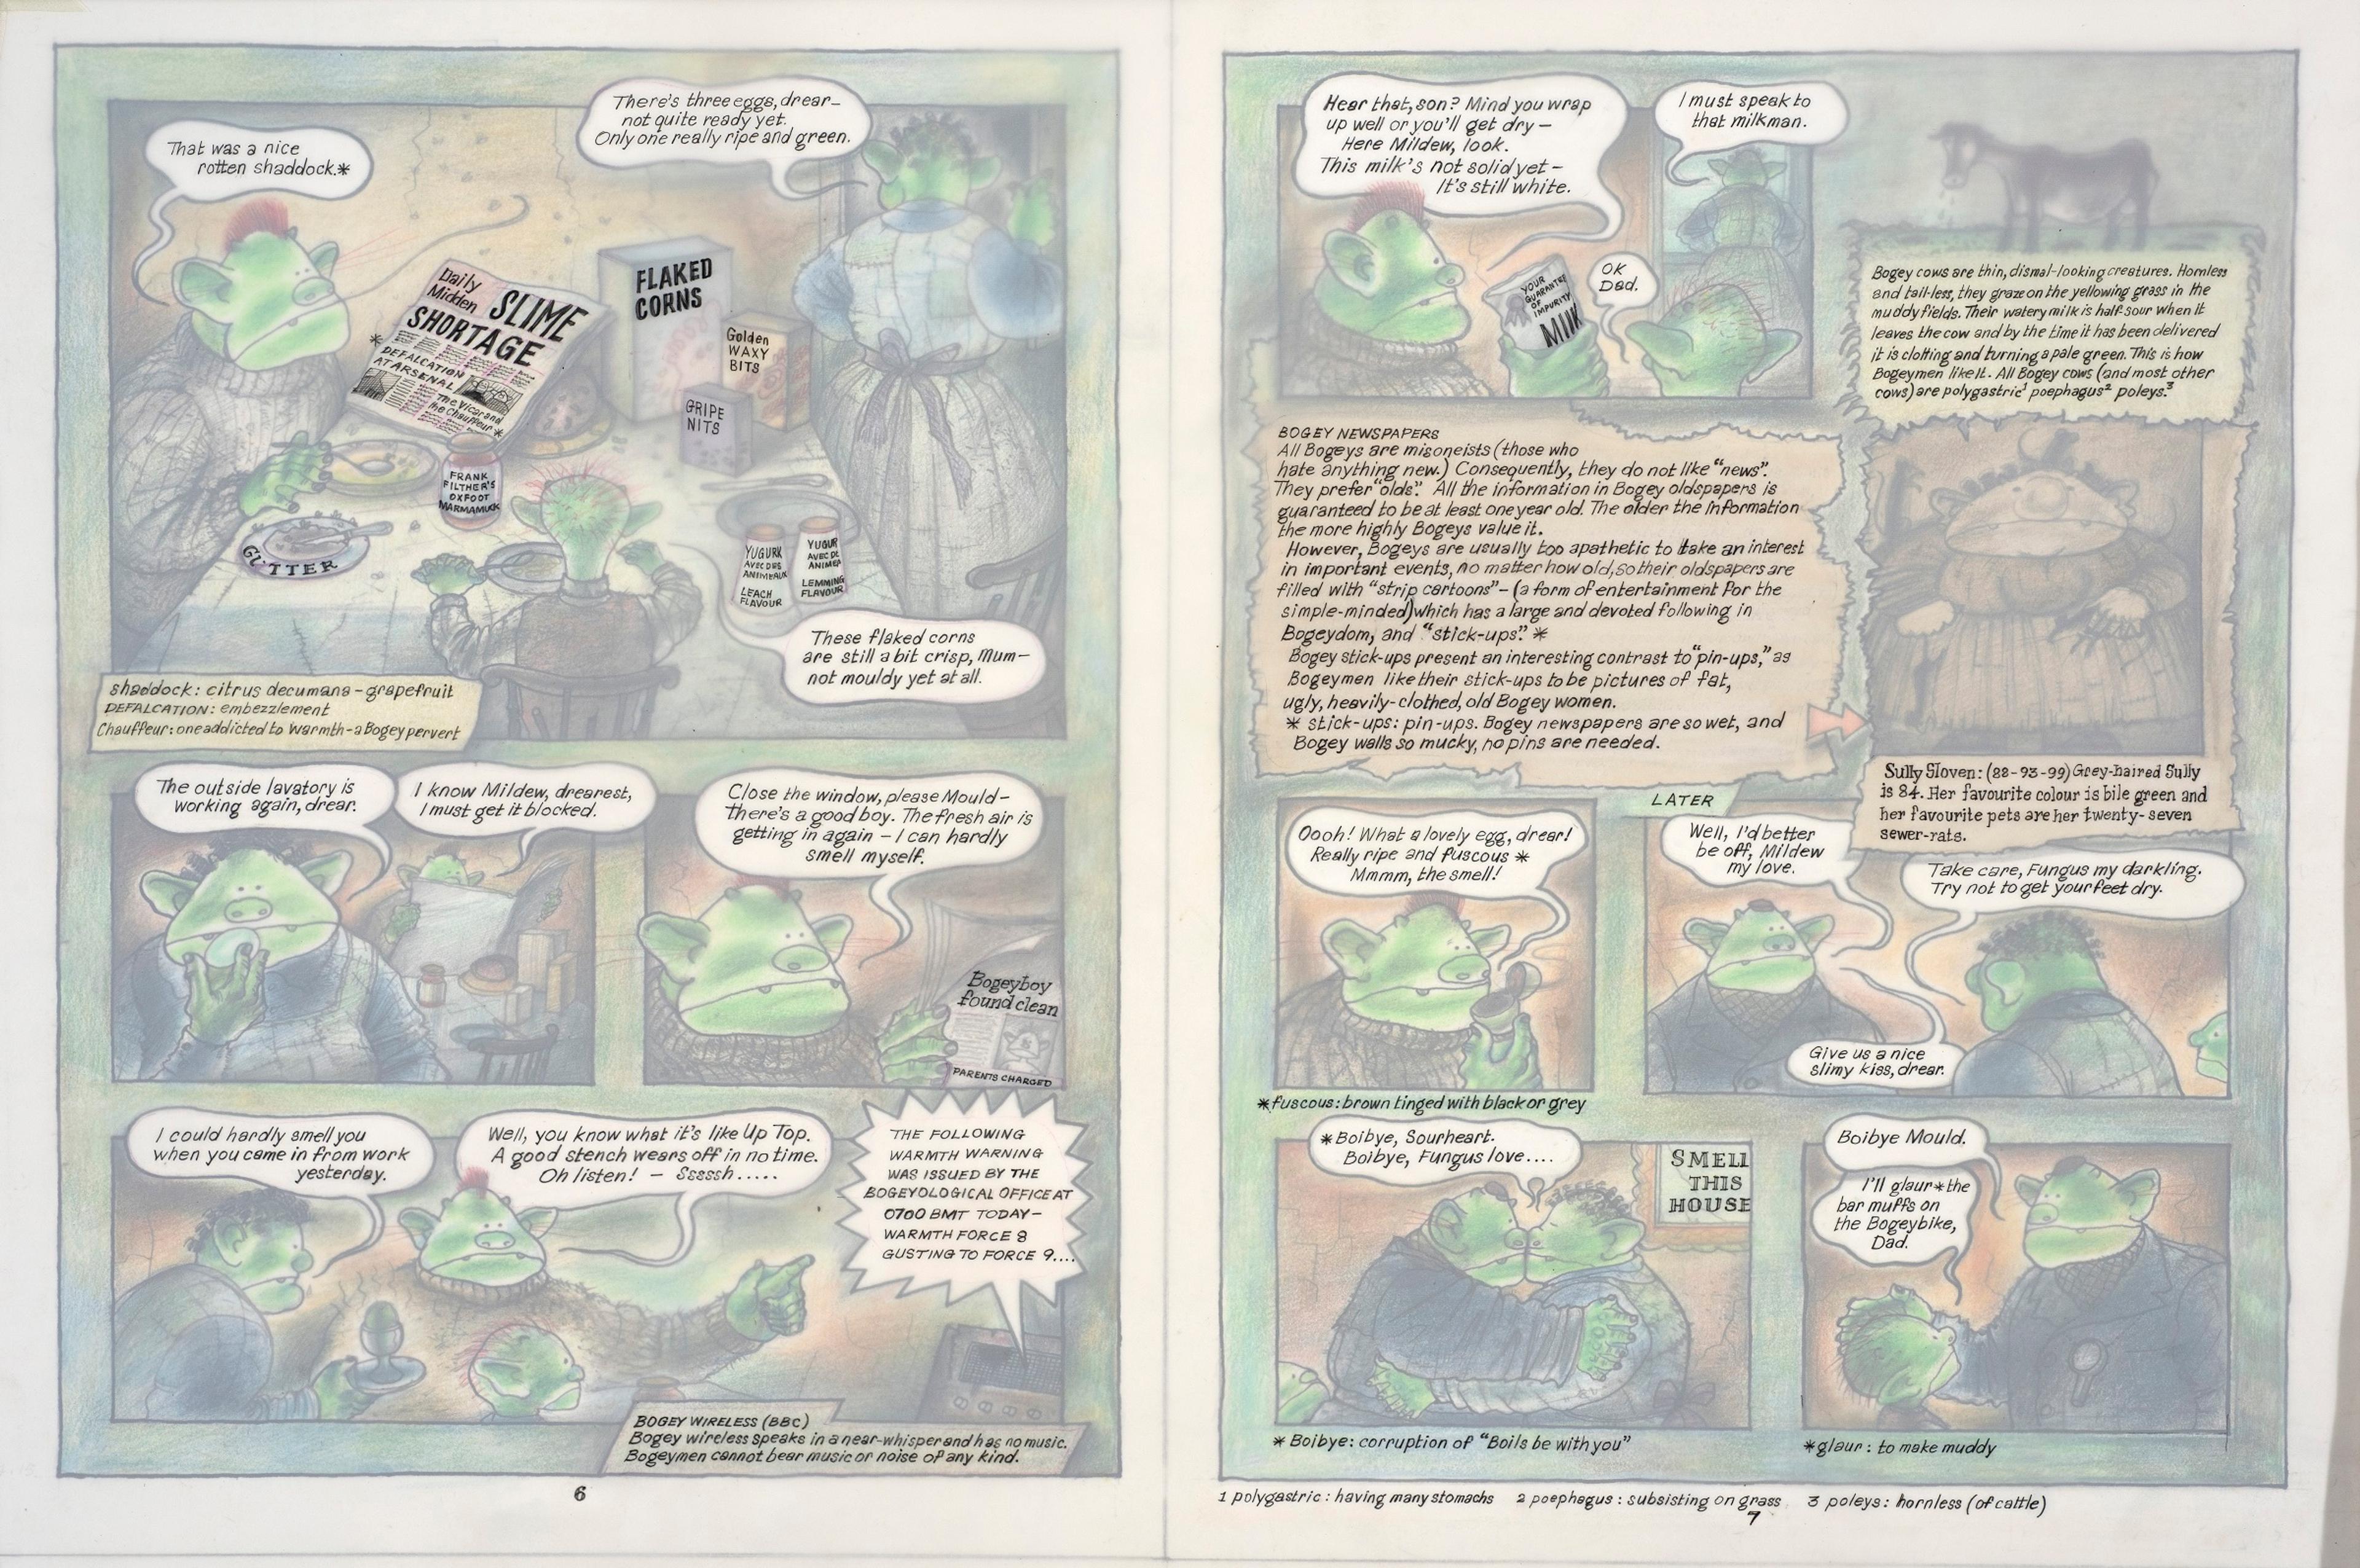 Illustration of Bogey family eating breakfast in 12 comic panels with overlaid tracing paper with speech bubble text